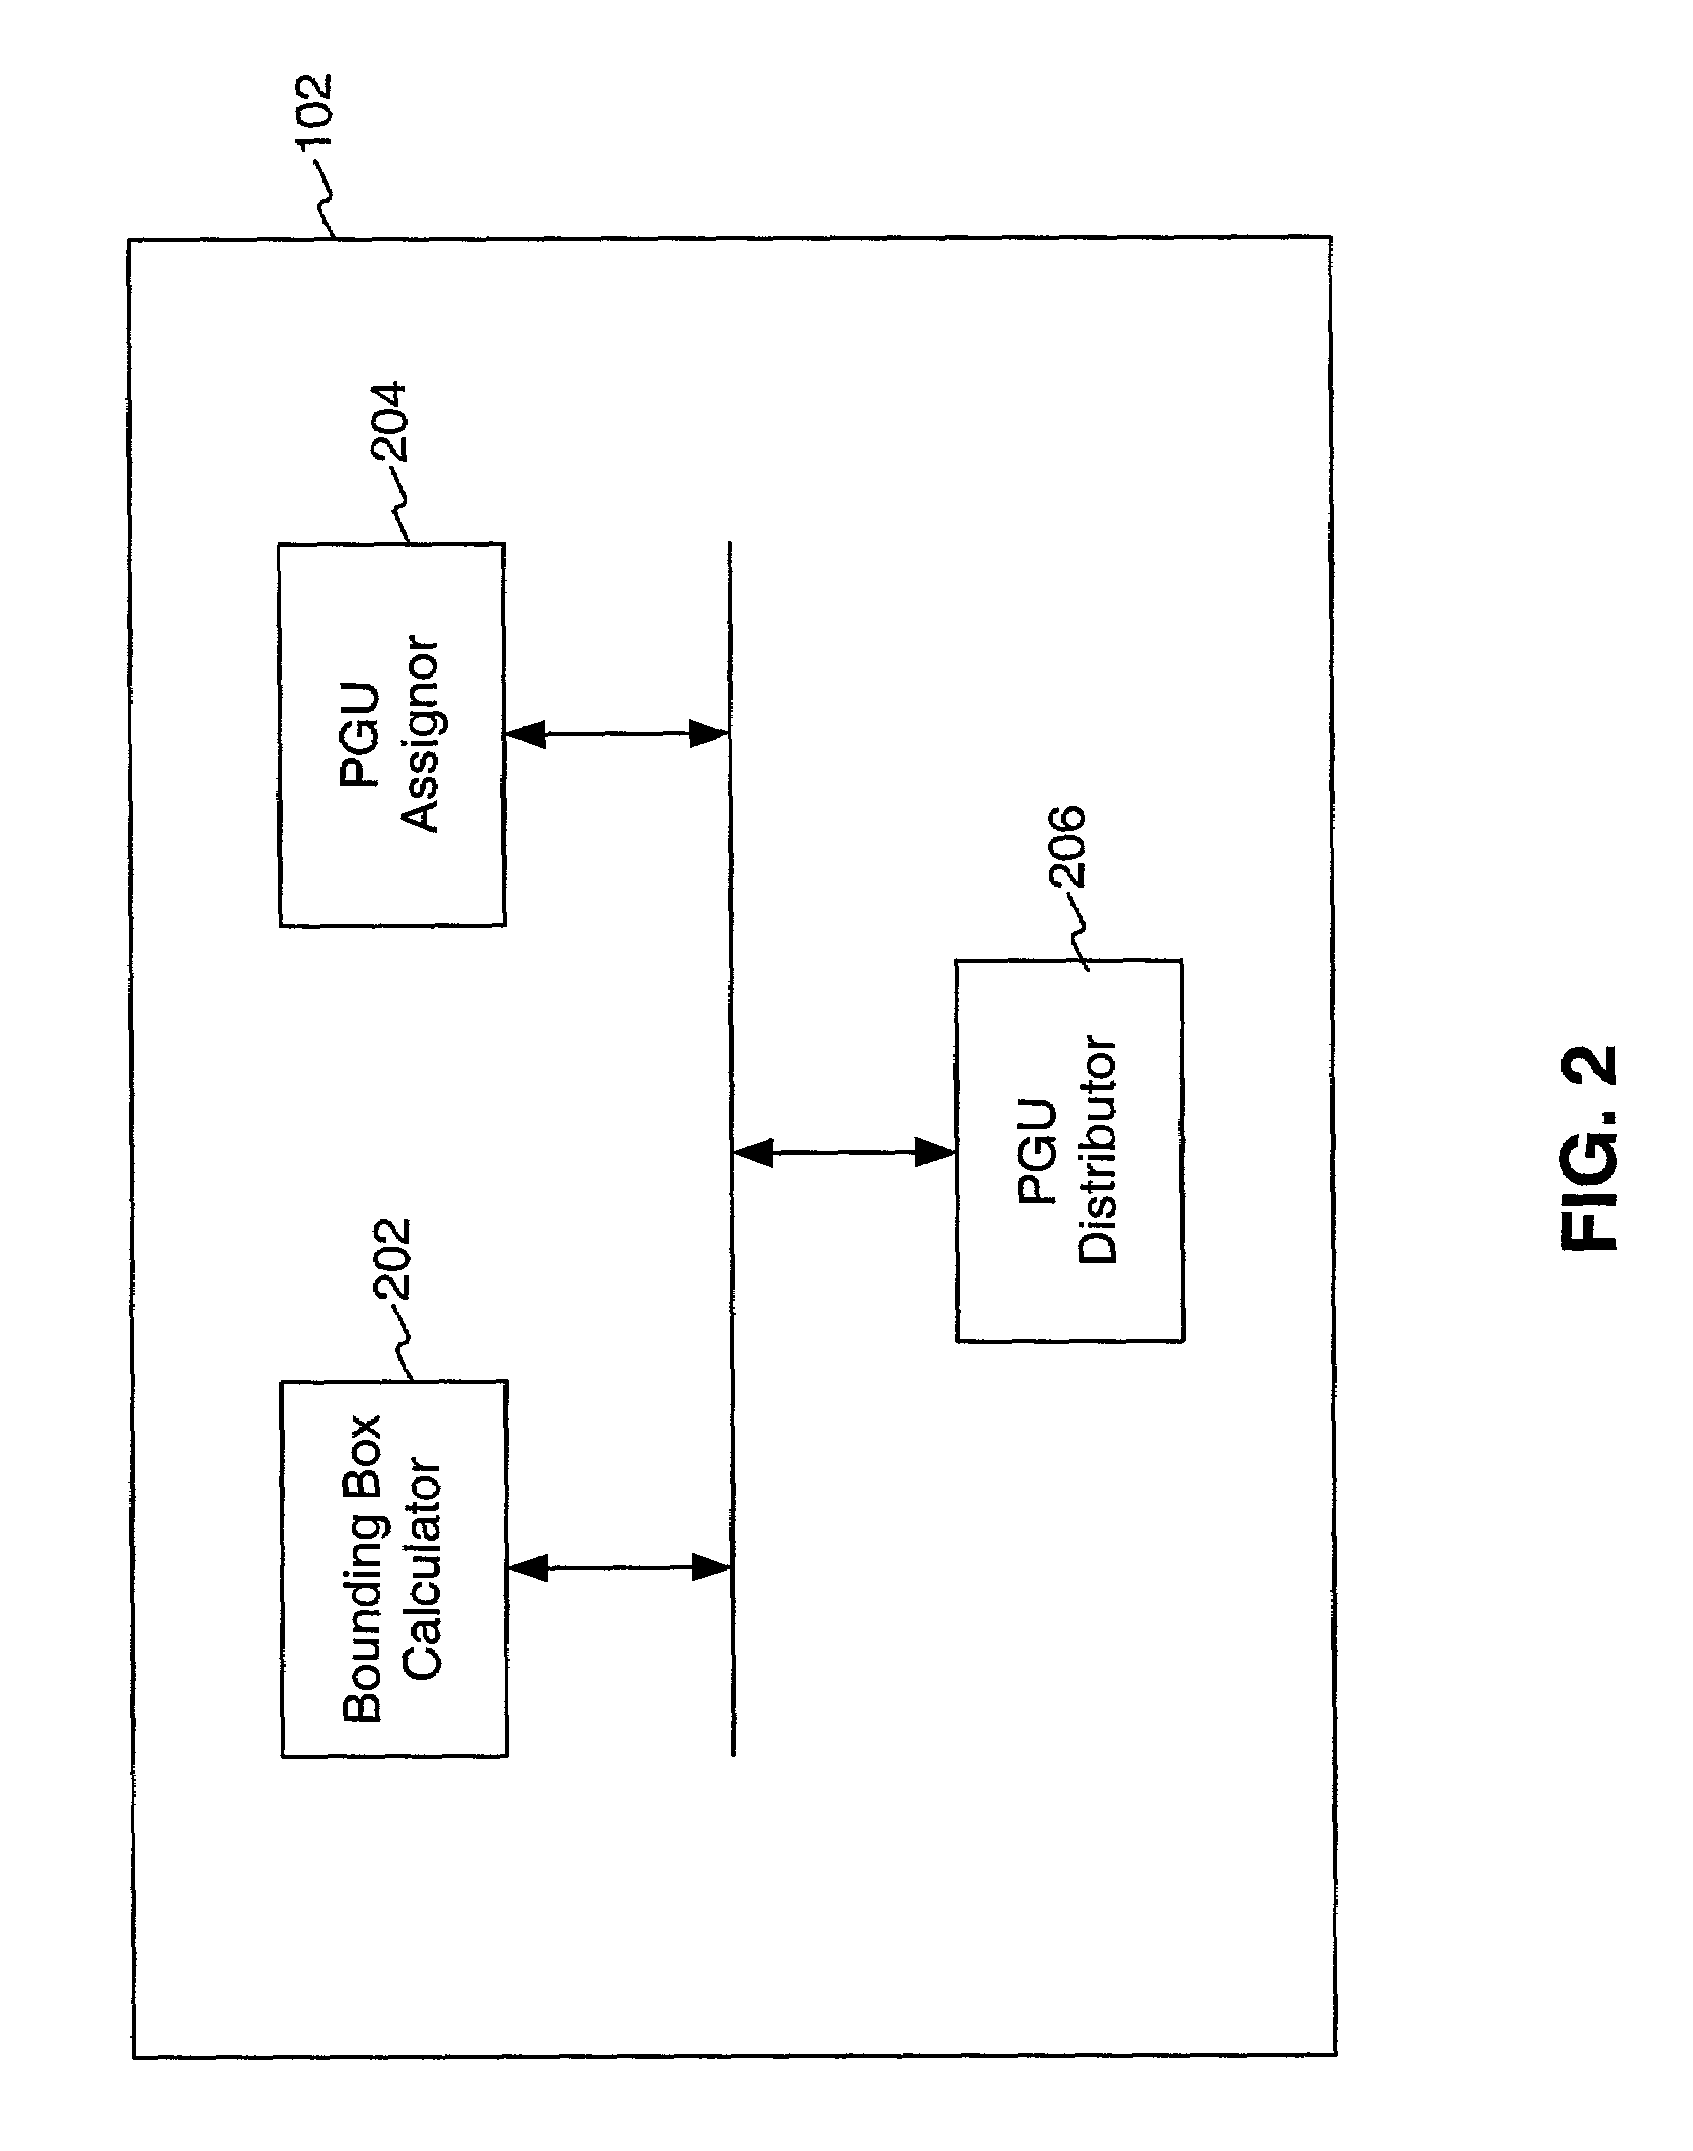 Method and system for minimizing an amount of data needed to test data against subarea boundaries in spatially composited digital video